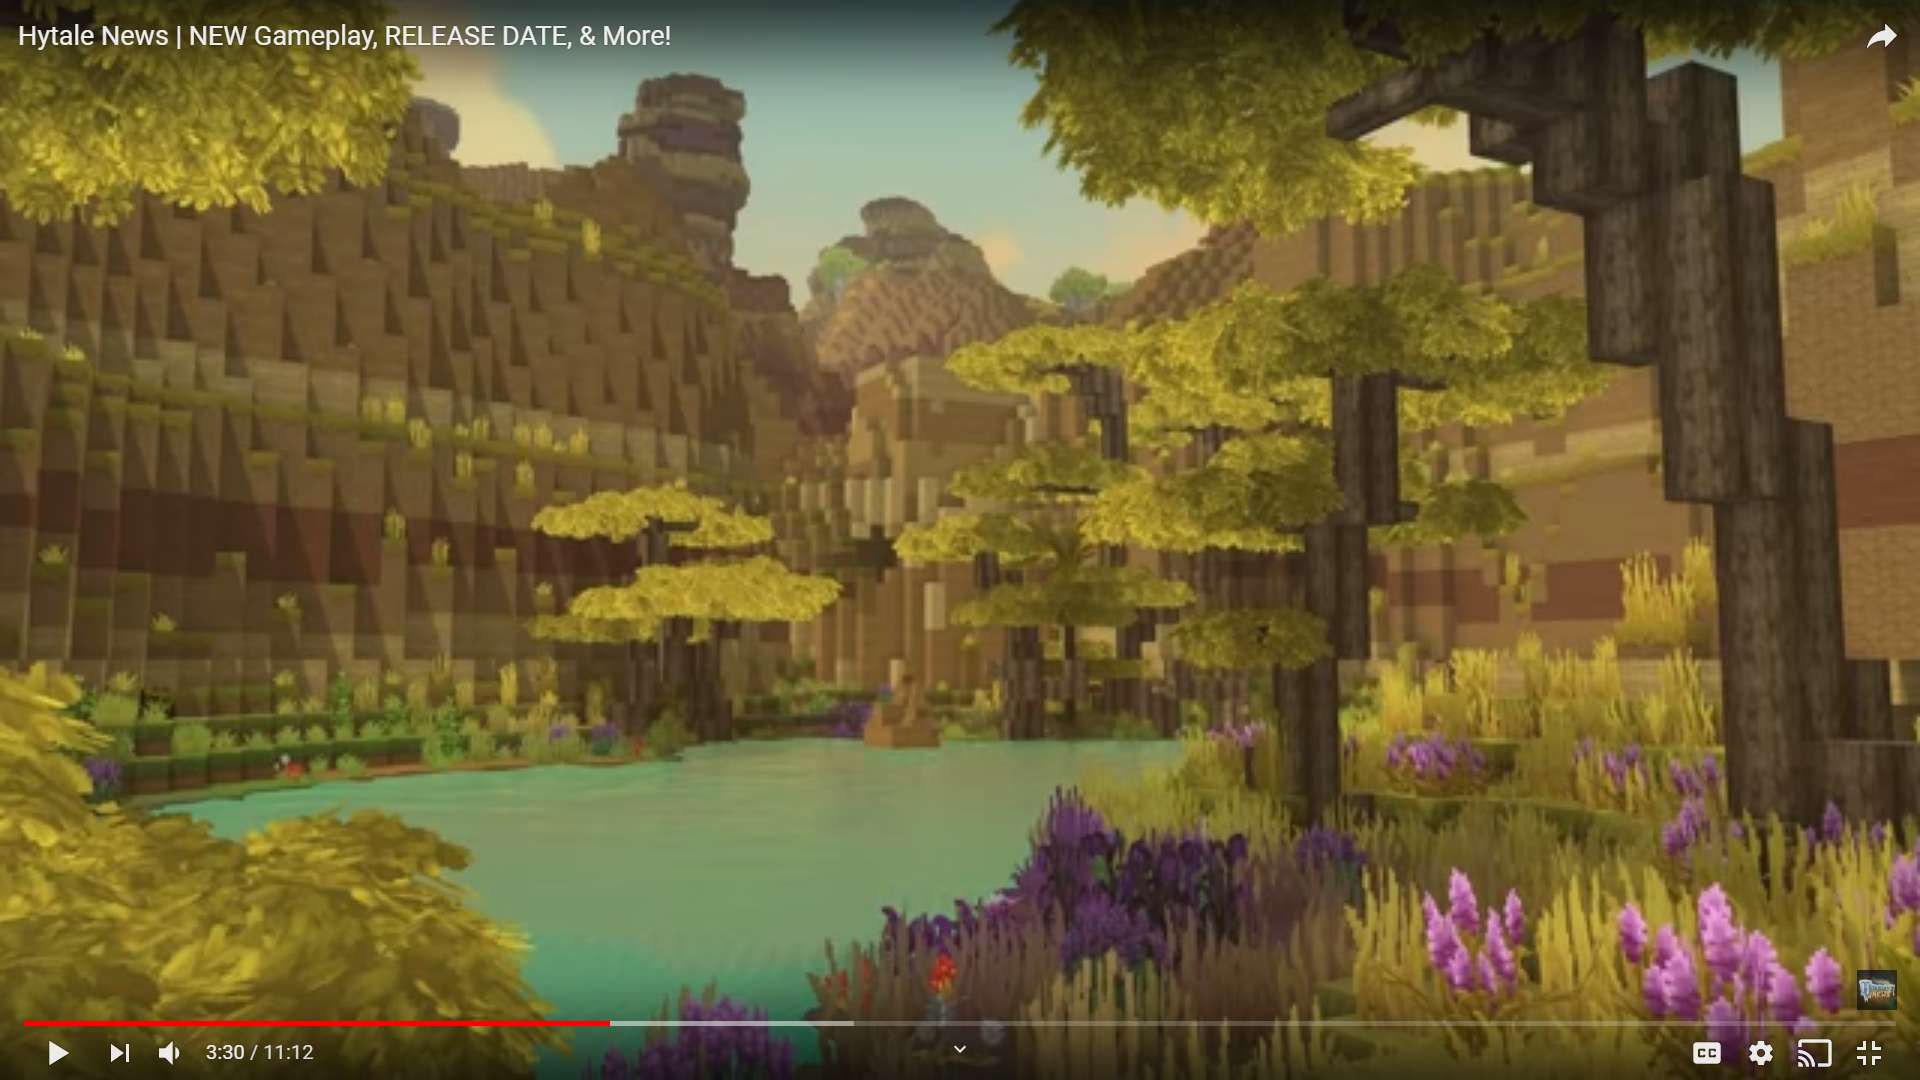 The Unique Fantasy RPG Hytale Is Expected To Release Sometime In 2021, According To Developer